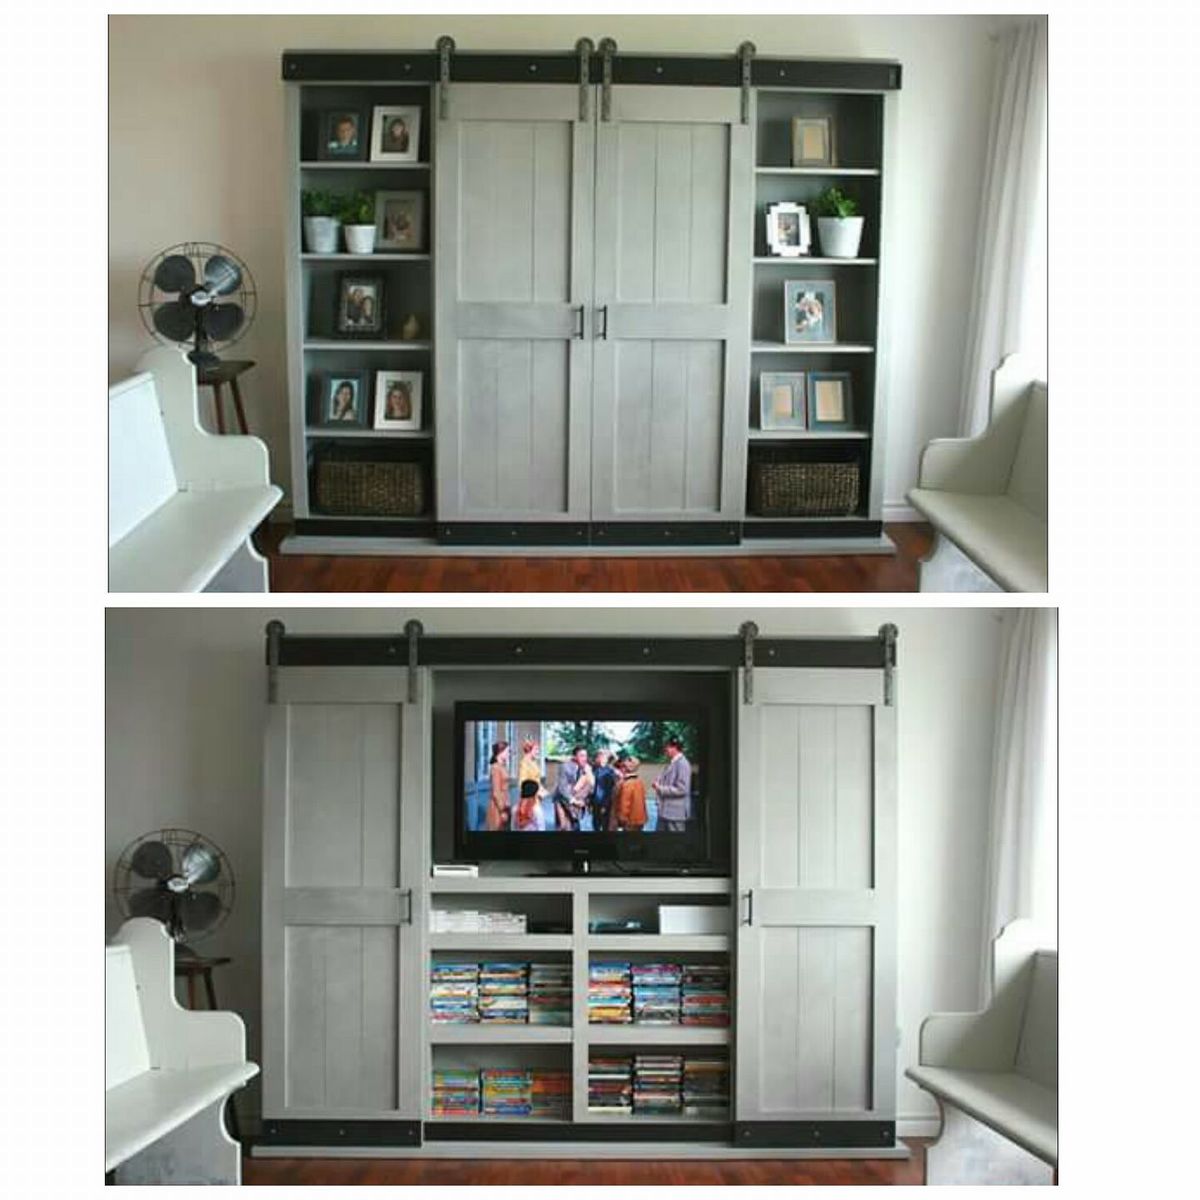 Ana White | Sliding Door Cabinet for TV - DIY Projects